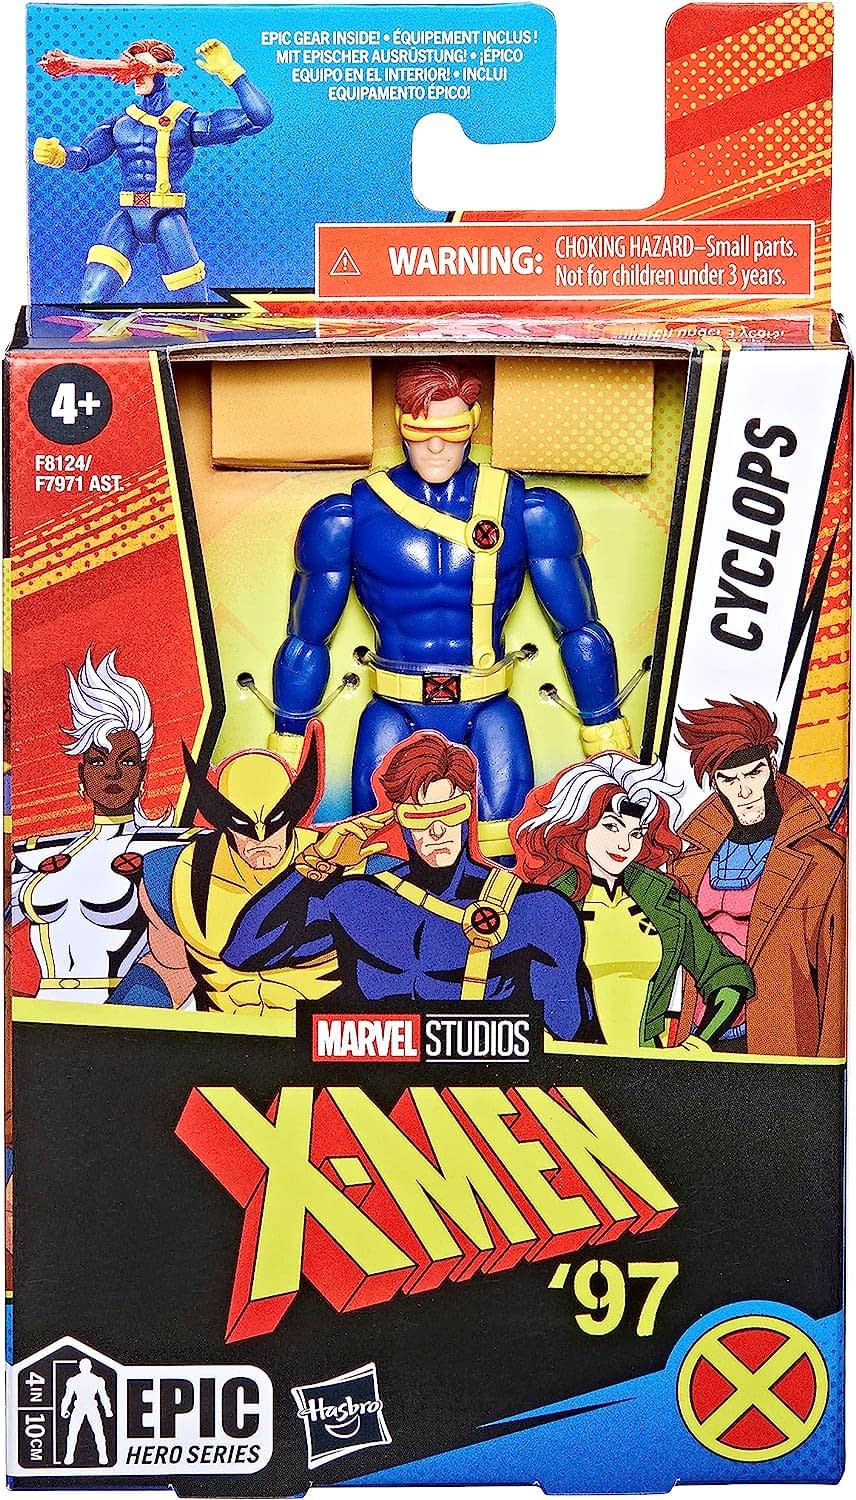 Hasbro Unveils New Collectibles for X-Men 97’ with Epic Hero Series